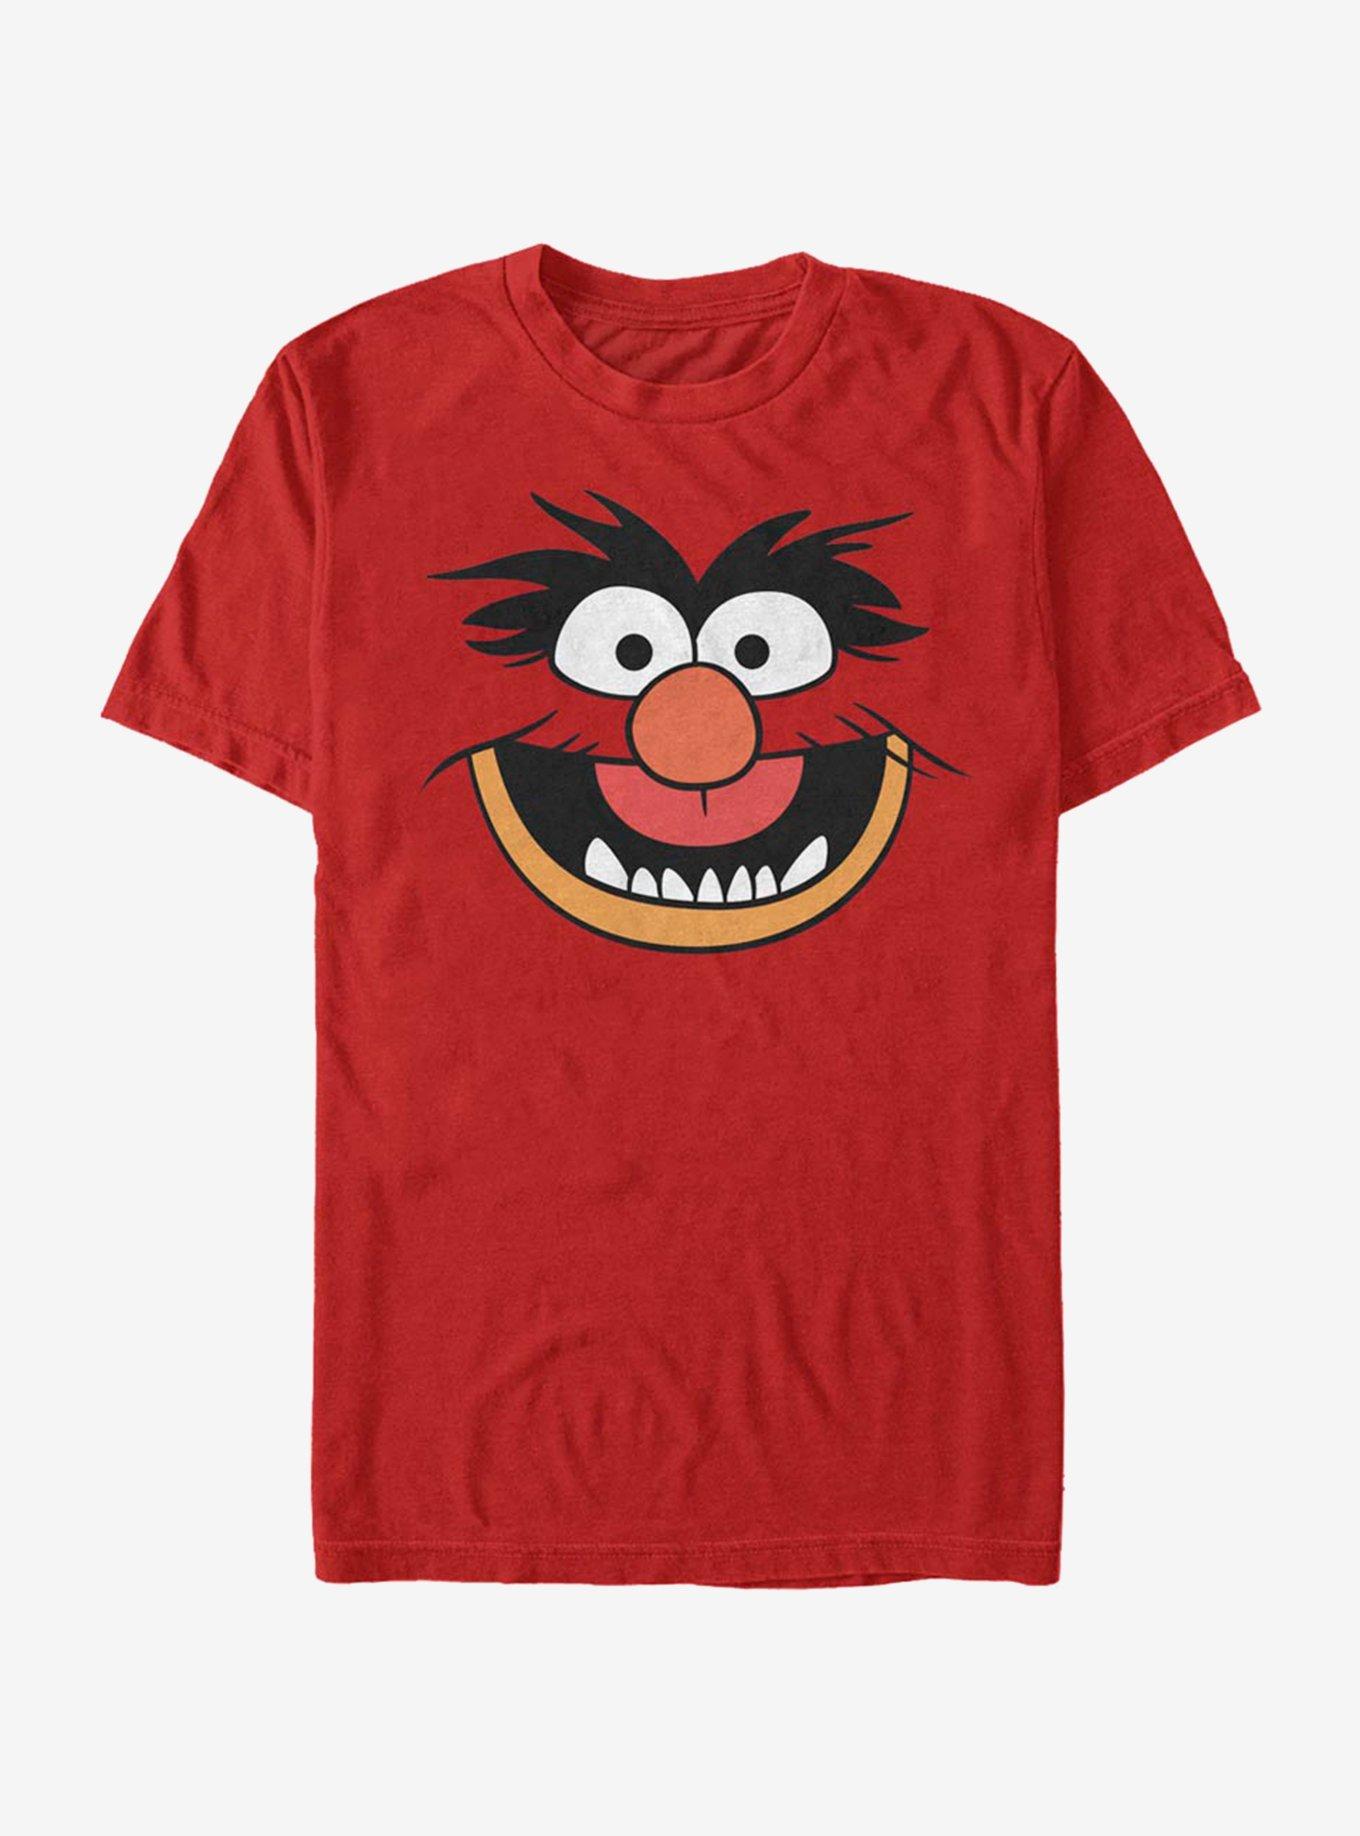 Disney The Muppets Animal Costume Tee T-Shirt, RED, hi-res